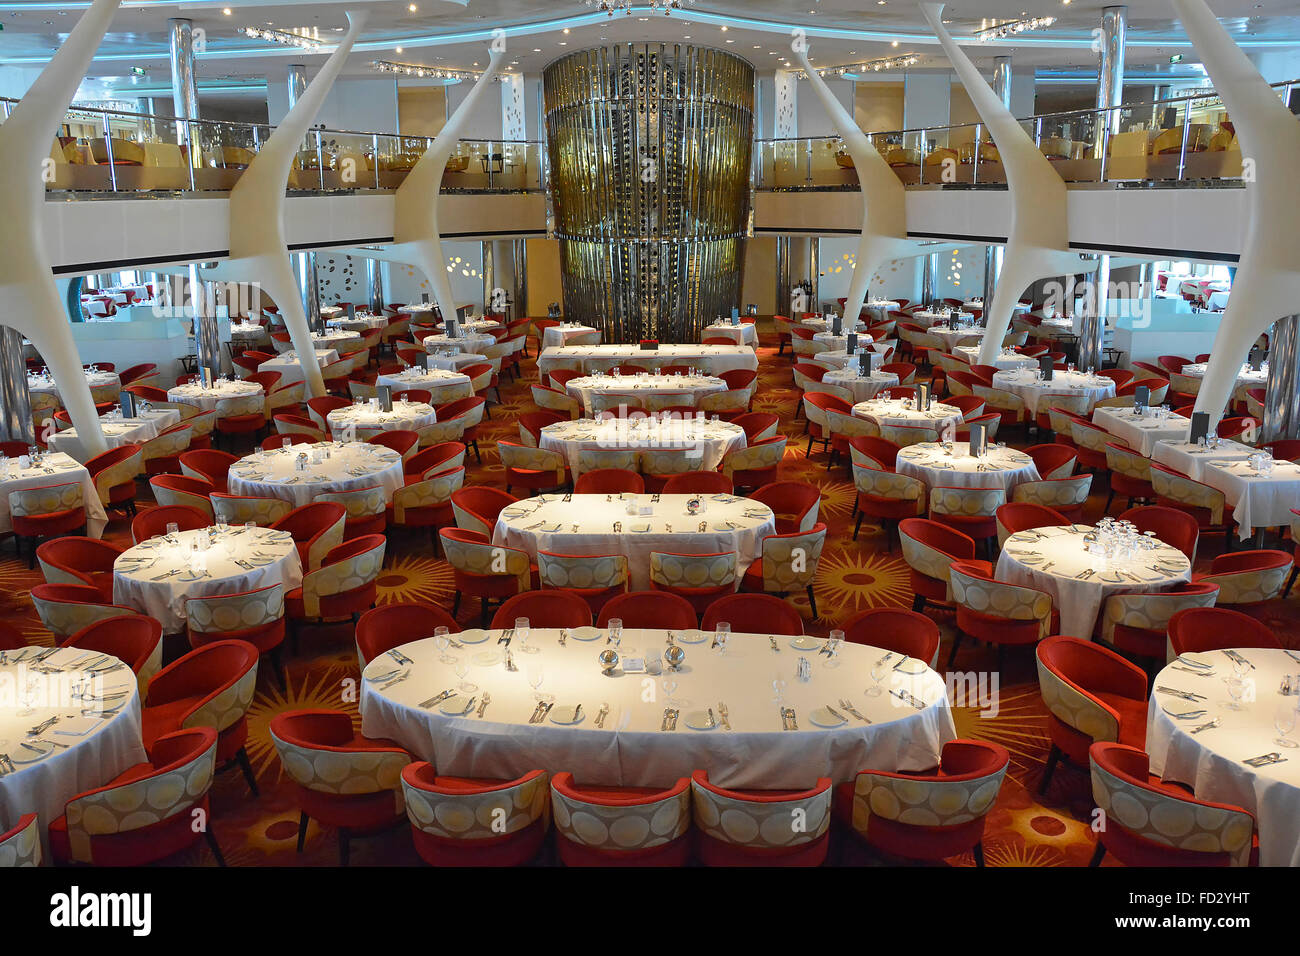 Cruise ship liner interior view of design of luxury restaurant place settings at tables & chairs prepared for evening of fine dining Mediterranean Sea Stock Photo